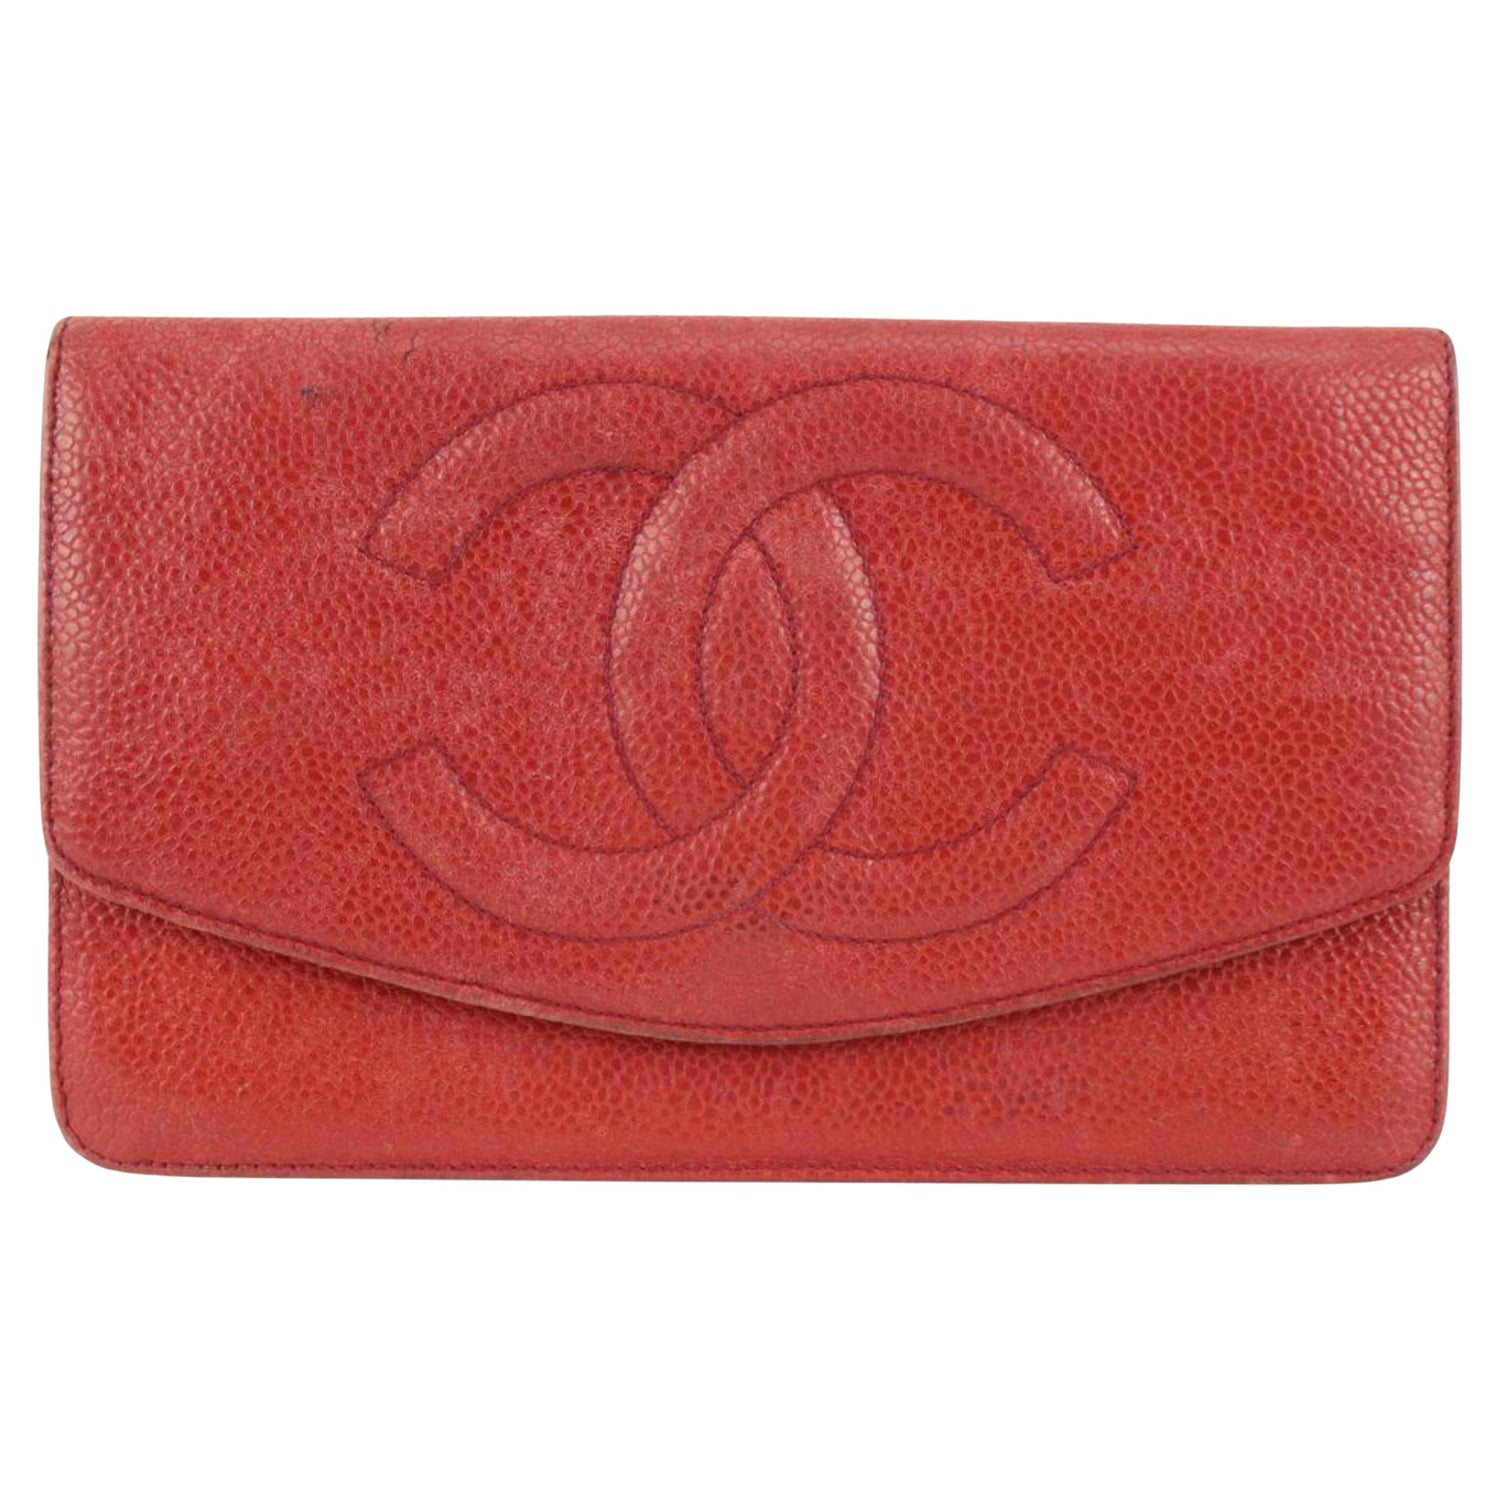 Louis Vuitton Red Epi Leather Card Case Wallet Holder 5LVL1223 at